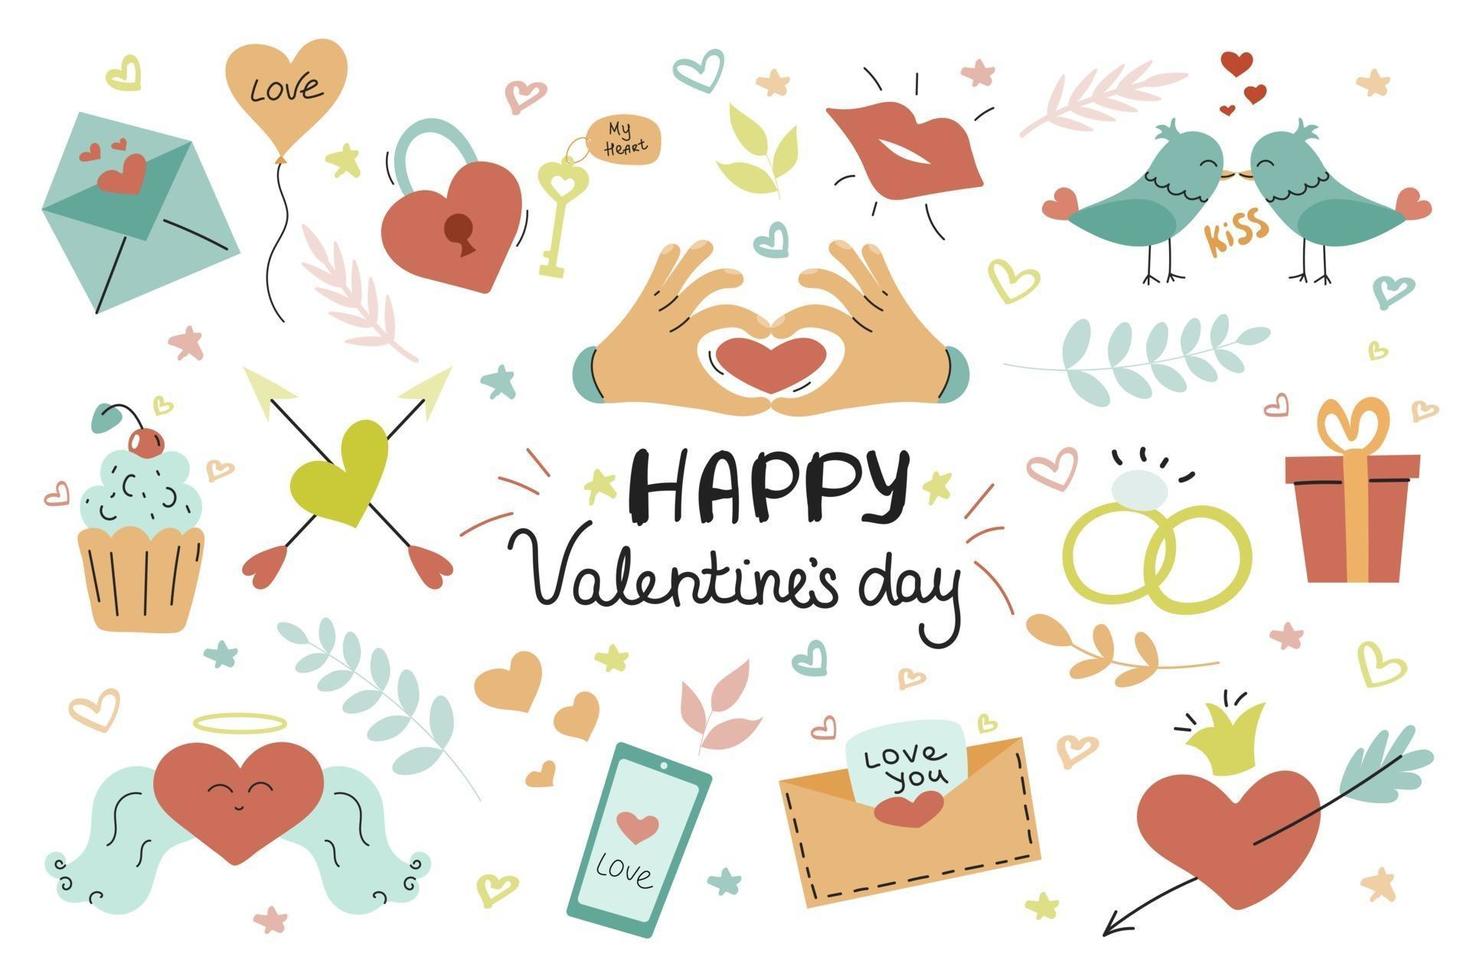 Big set for Valentine's Day. Handwritten text, cute illustrations for greeting cards, posters, stickers. Vector image on a white background. February 14